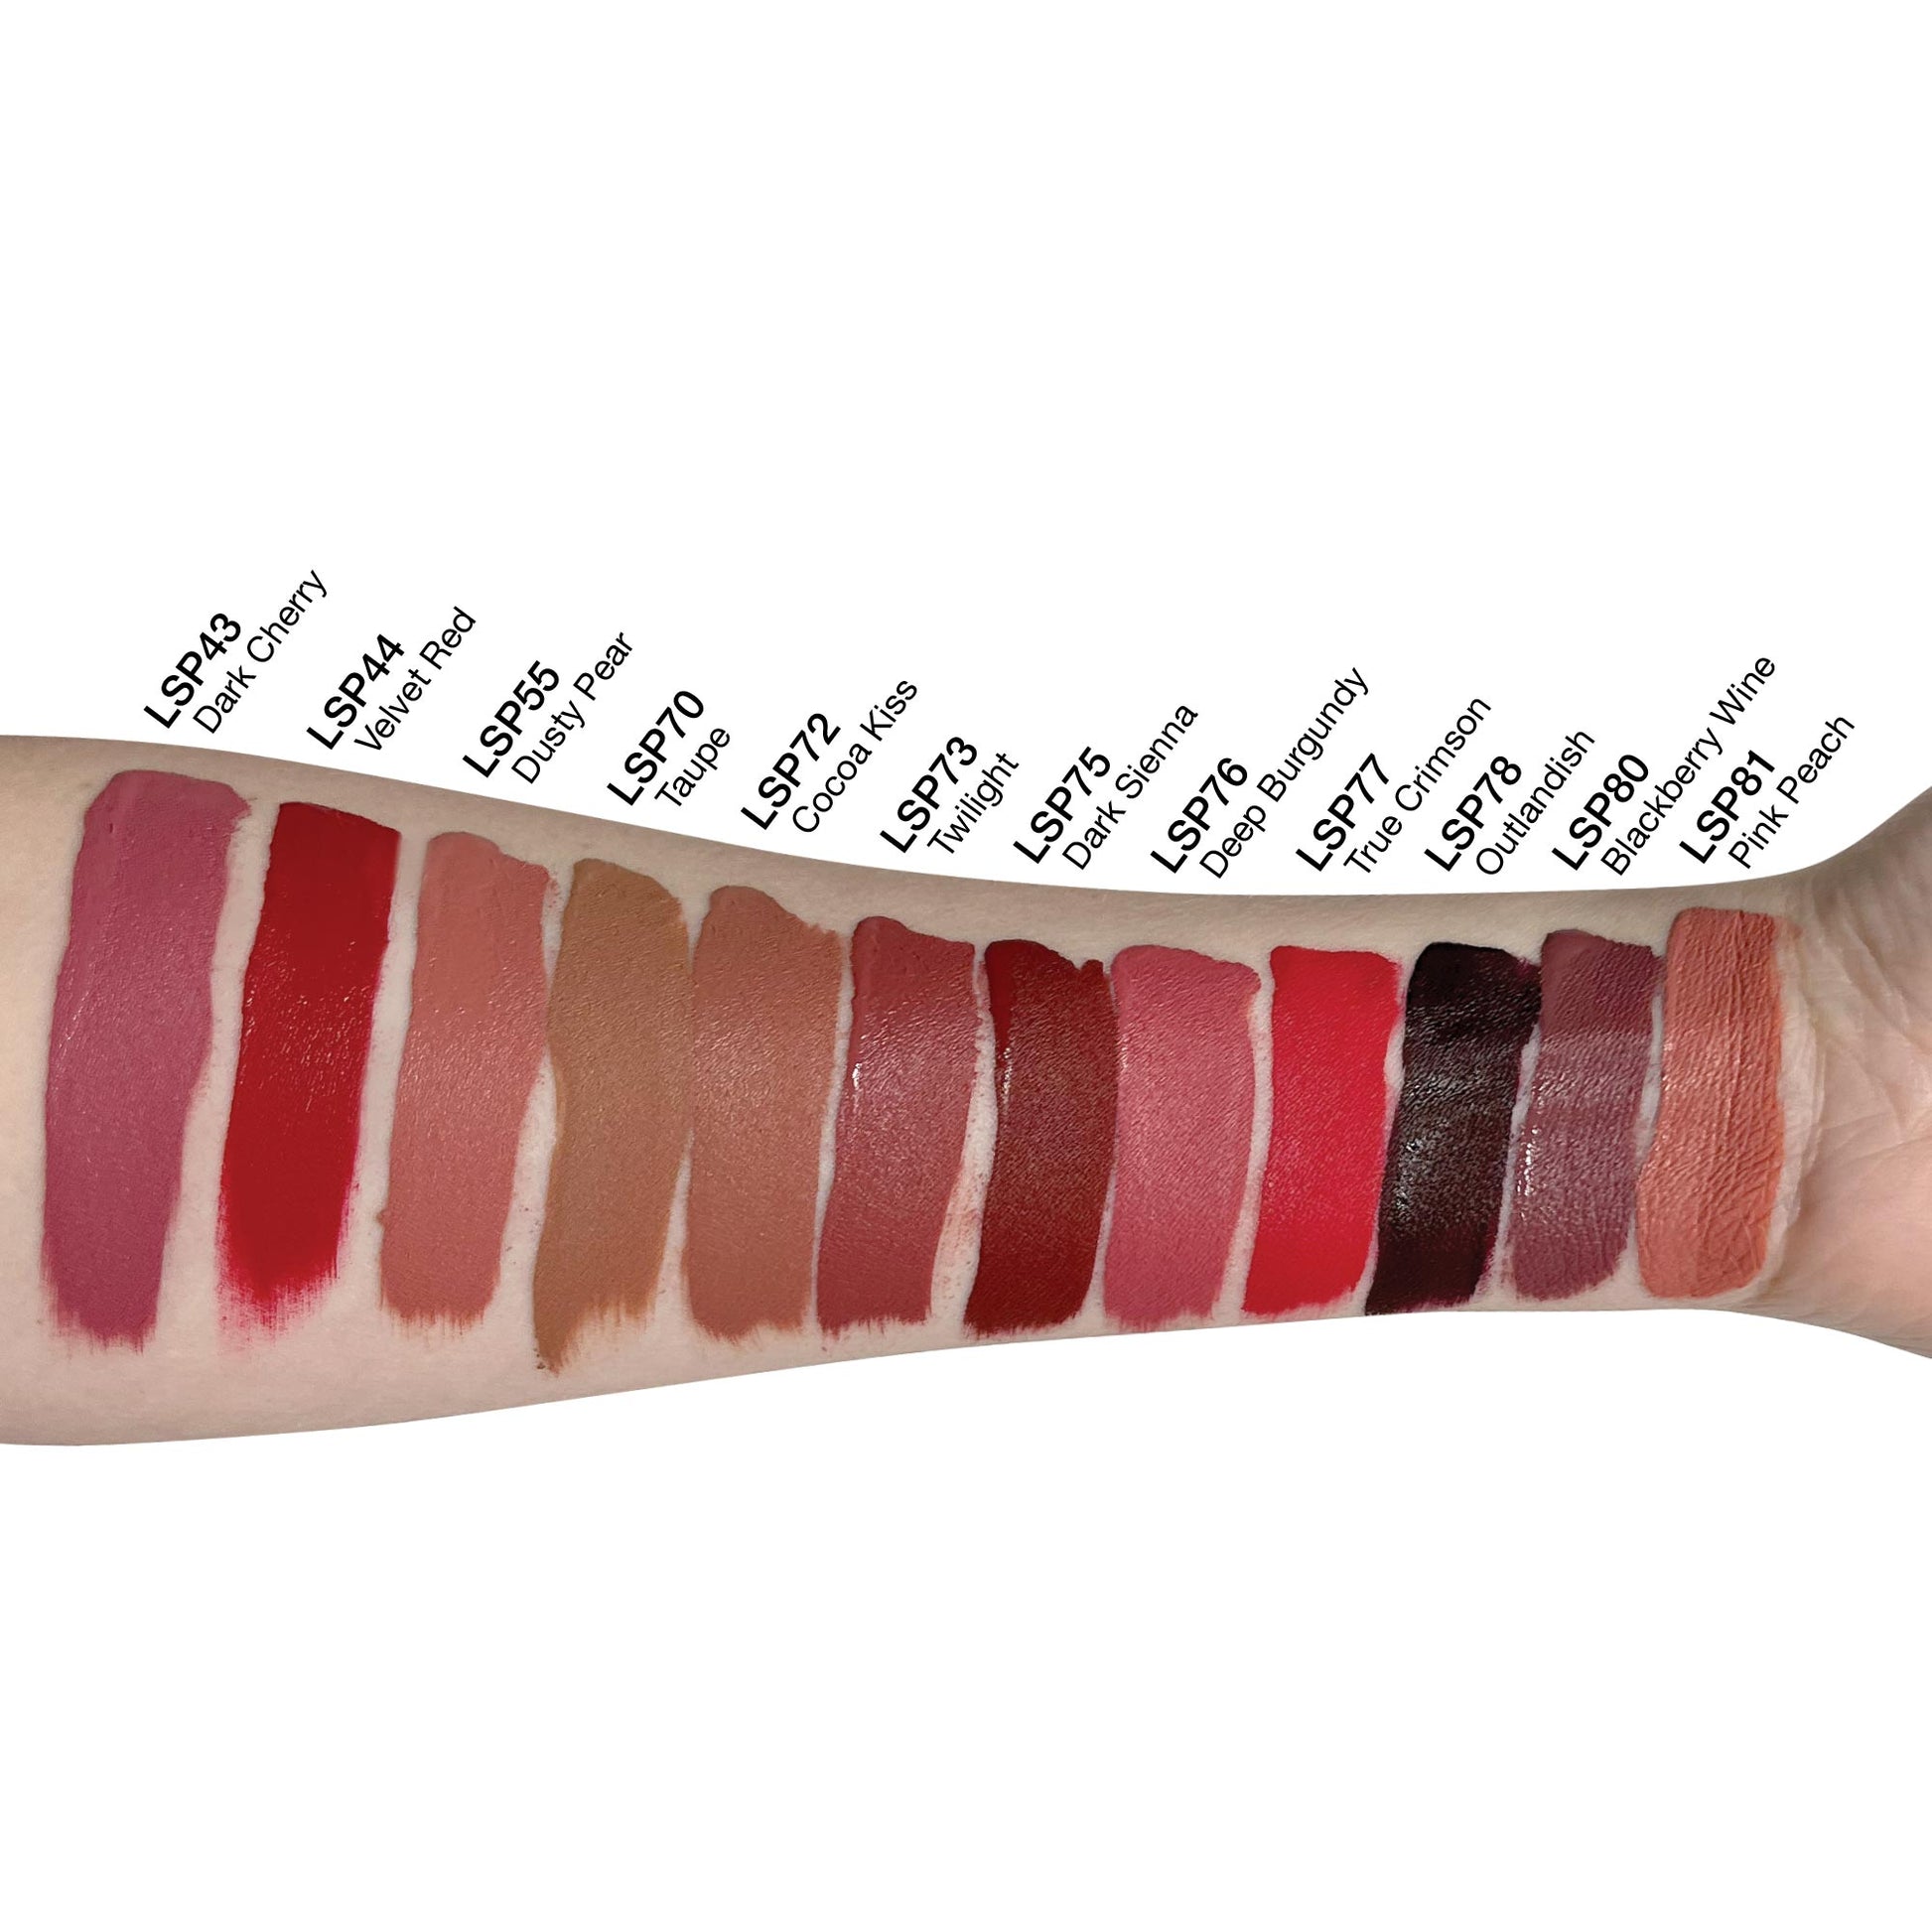 12 lip stain shades for online purchase. Cruisin Organics Pink Peach Matte Lip Stain. Buy now.